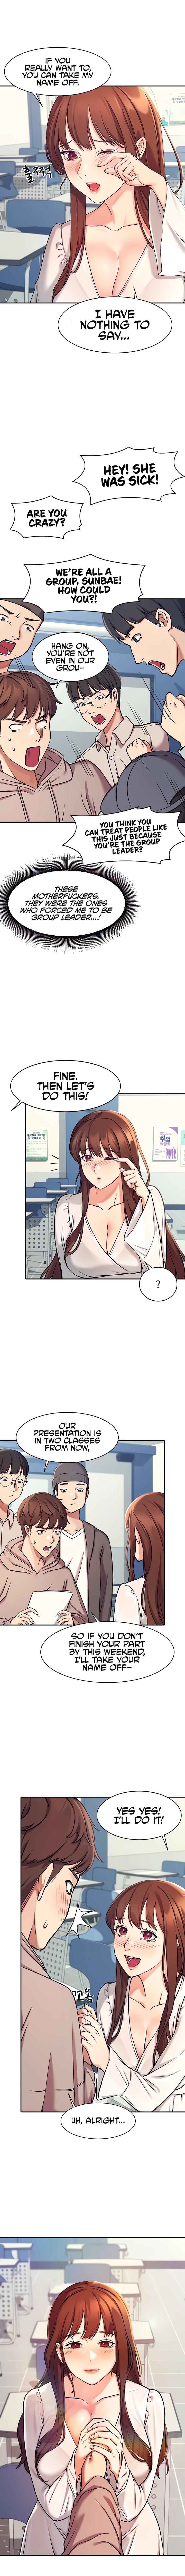 Is There No Goddess in My College? Ch.13/? 11